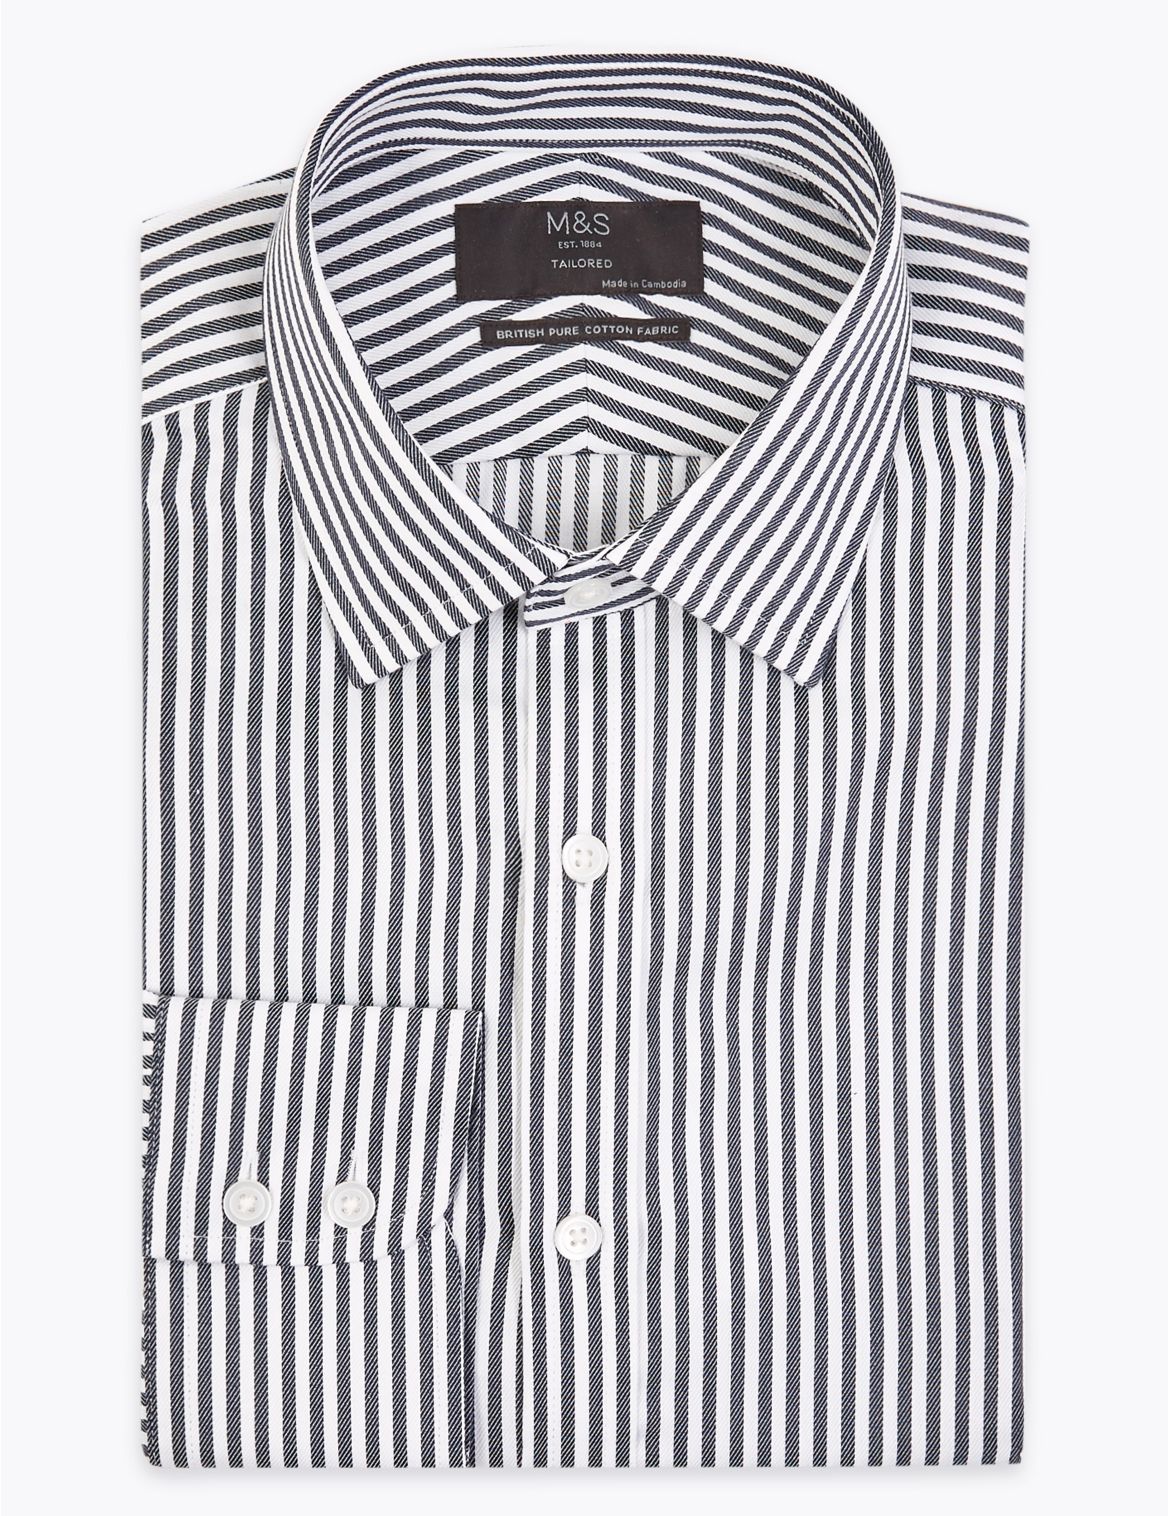 Tailored Fit English Fine Cotton Striped Shirt blue